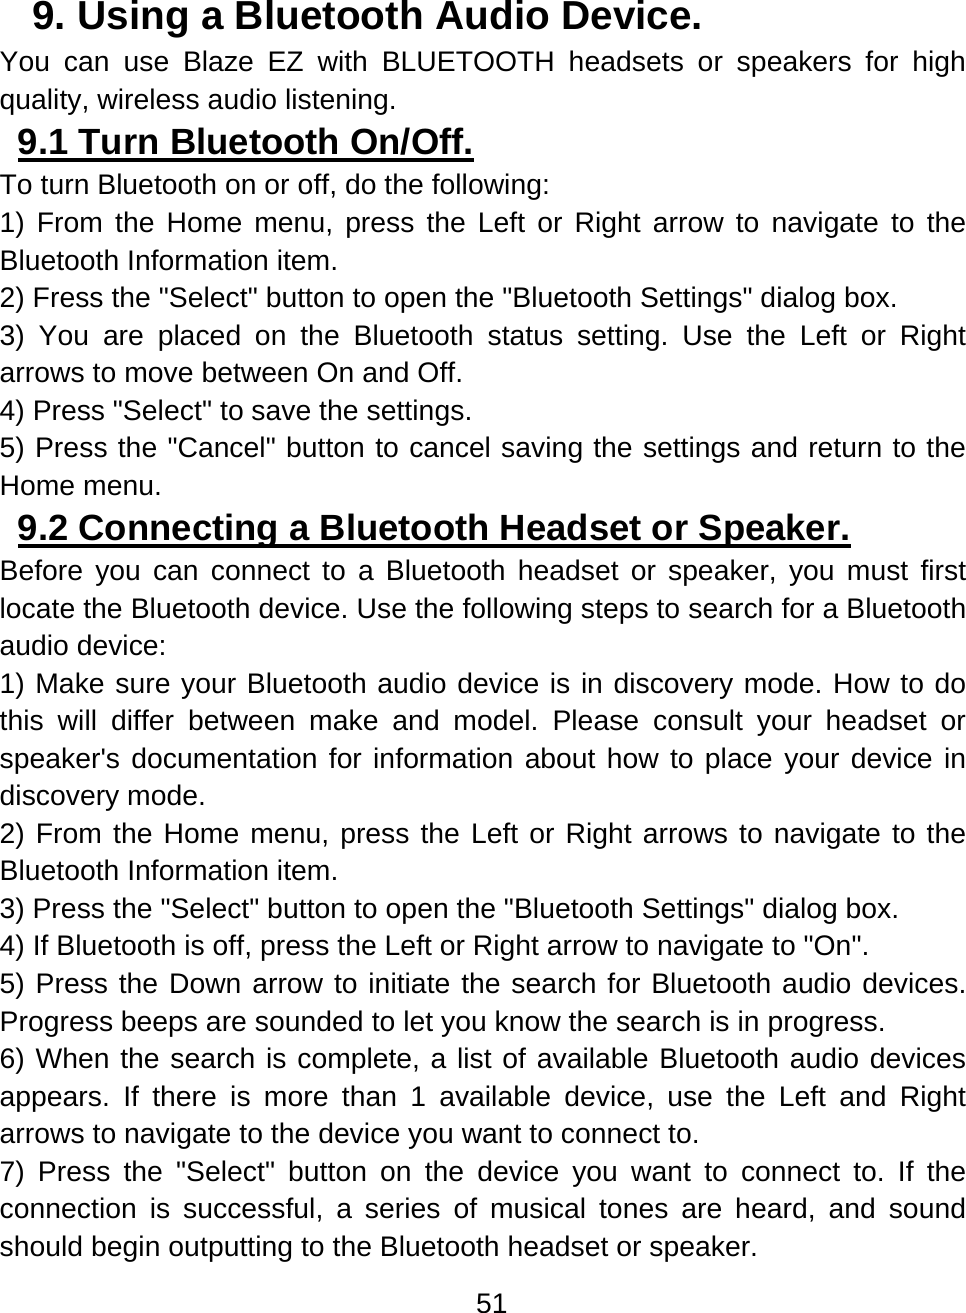 51  9. Using a Bluetooth Audio Device.  You can use Blaze EZ with BLUETOOTH headsets or speakers for high quality, wireless audio listening. 9.1 Turn Bluetooth On/Off.  To turn Bluetooth on or off, do the following: 1) From the Home menu, press the Left or Right arrow to navigate to the Bluetooth Information item. 2) Fress the &quot;Select&quot; button to open the &quot;Bluetooth Settings&quot; dialog box.  3) You are placed on the Bluetooth status setting. Use the Left or Right arrows to move between On and Off. 4) Press &quot;Select&quot; to save the settings. 5) Press the &quot;Cancel&quot; button to cancel saving the settings and return to the Home menu. 9.2 Connecting a Bluetooth Headset or Speaker.  Before you can connect to a Bluetooth headset or speaker, you must first locate the Bluetooth device. Use the following steps to search for a Bluetooth audio device: 1) Make sure your Bluetooth audio device is in discovery mode. How to do this will differ between make and model. Please consult your headset or speaker&apos;s documentation for information about how to place your device in discovery mode. 2) From the Home menu, press the Left or Right arrows to navigate to the Bluetooth Information item.  3) Press the &quot;Select&quot; button to open the &quot;Bluetooth Settings&quot; dialog box.   4) If Bluetooth is off, press the Left or Right arrow to navigate to &quot;On&quot;. 5) Press the Down arrow to initiate the search for Bluetooth audio devices. Progress beeps are sounded to let you know the search is in progress.   6) When the search is complete, a list of available Bluetooth audio devices appears. If there is more than 1 available device, use the Left and Right arrows to navigate to the device you want to connect to. 7) Press the &quot;Select&quot; button on the device you want to connect to. If the connection is successful, a series of musical tones are heard, and sound should begin outputting to the Bluetooth headset or speaker. 